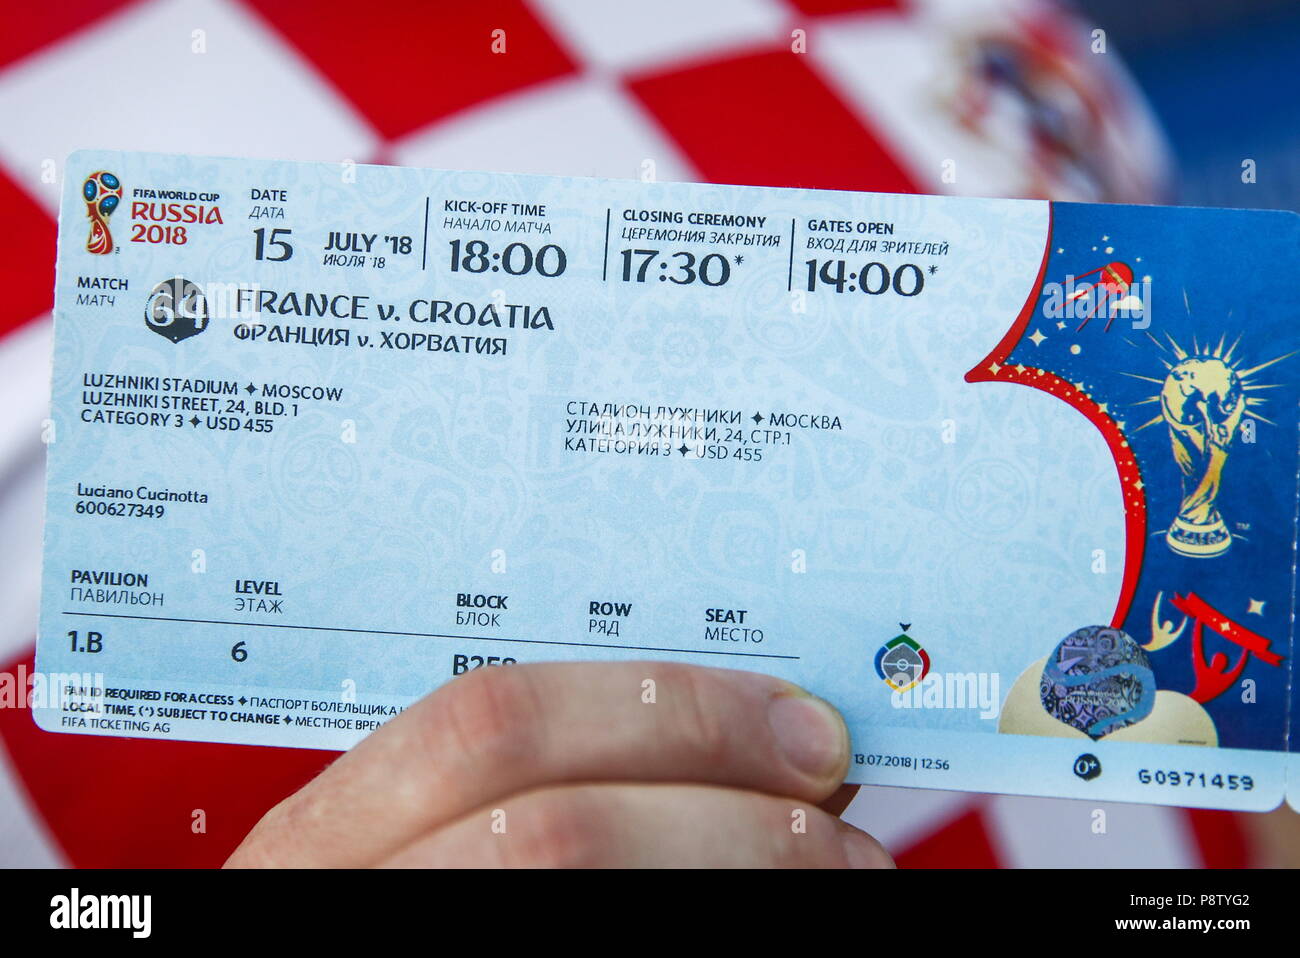 World Cup Final Ticket High Resolution Stock Photography and Images - Alamy